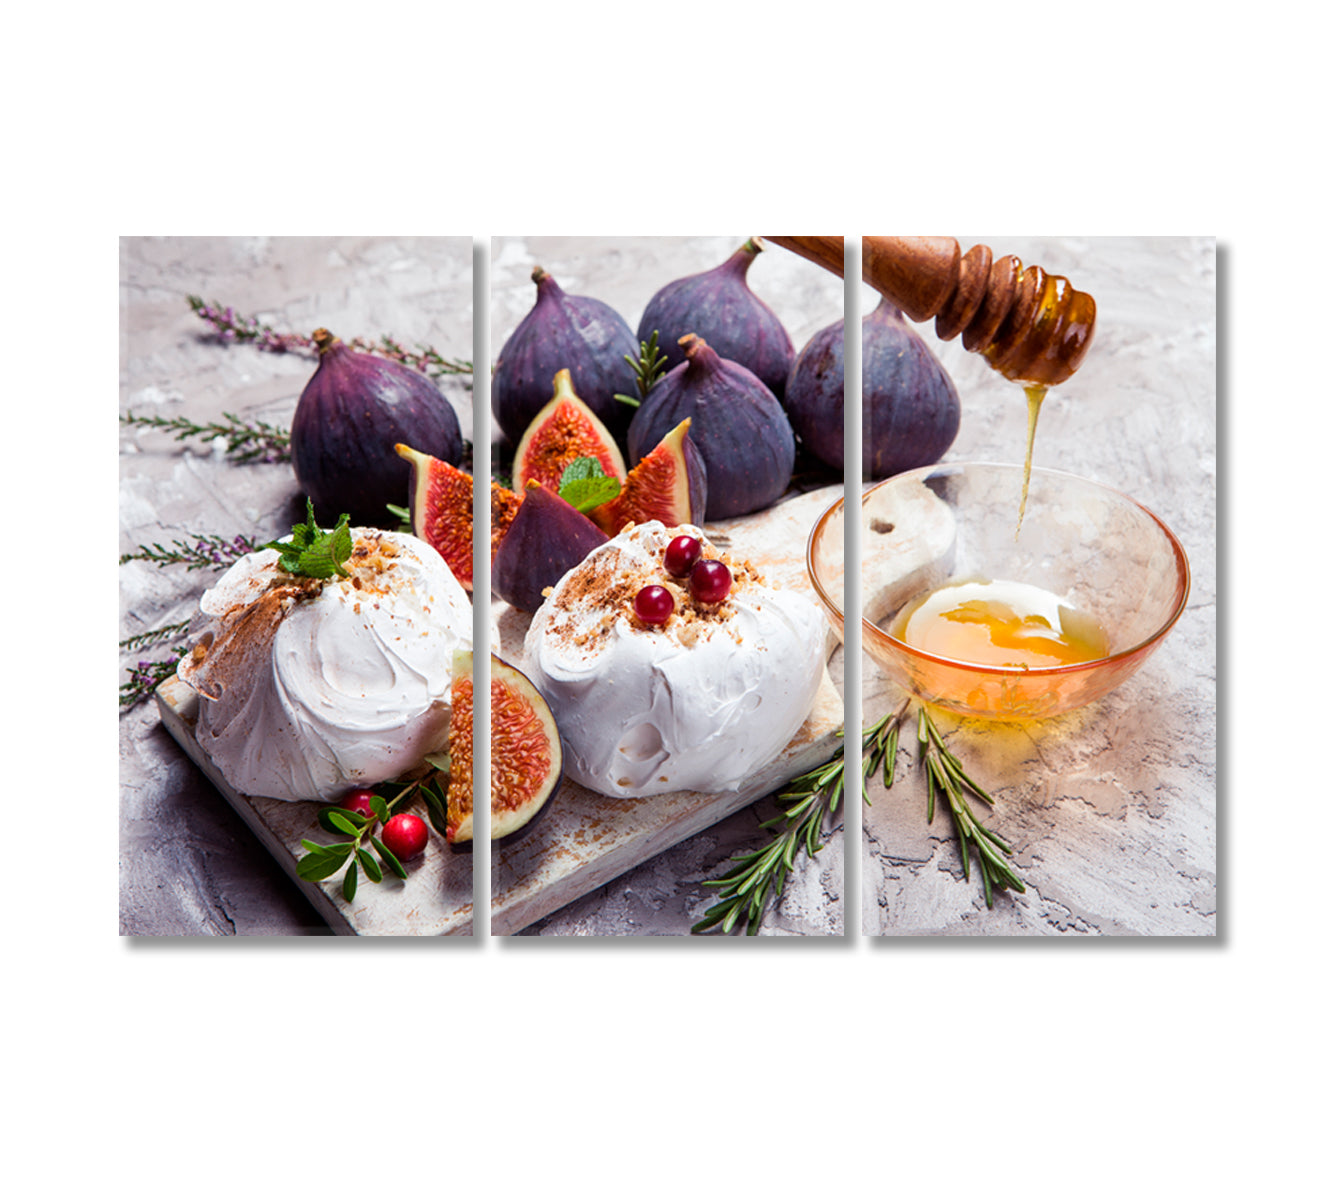 Mini Cake with Figs and Cranberries Canvas Print-Canvas Print-CetArt-3 Panels-36x24 inches-CetArt